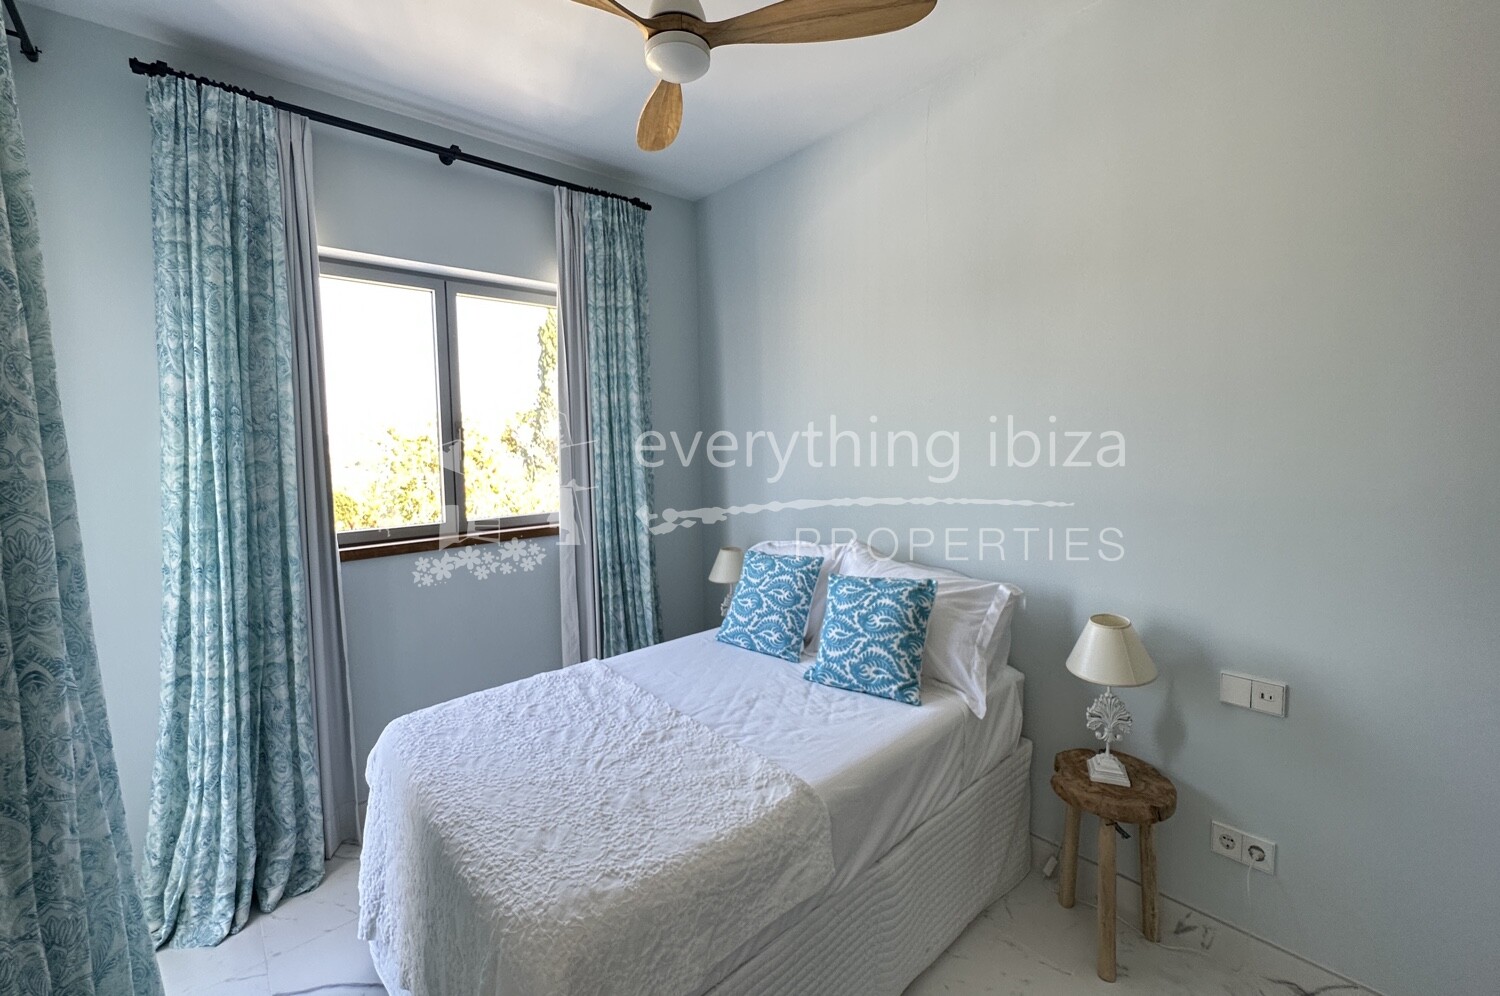 Beautiful Renovated Detached Villa Close to Village with Tourist License, ref. 1629, for sale in Ibiza by everything ibiza Properties